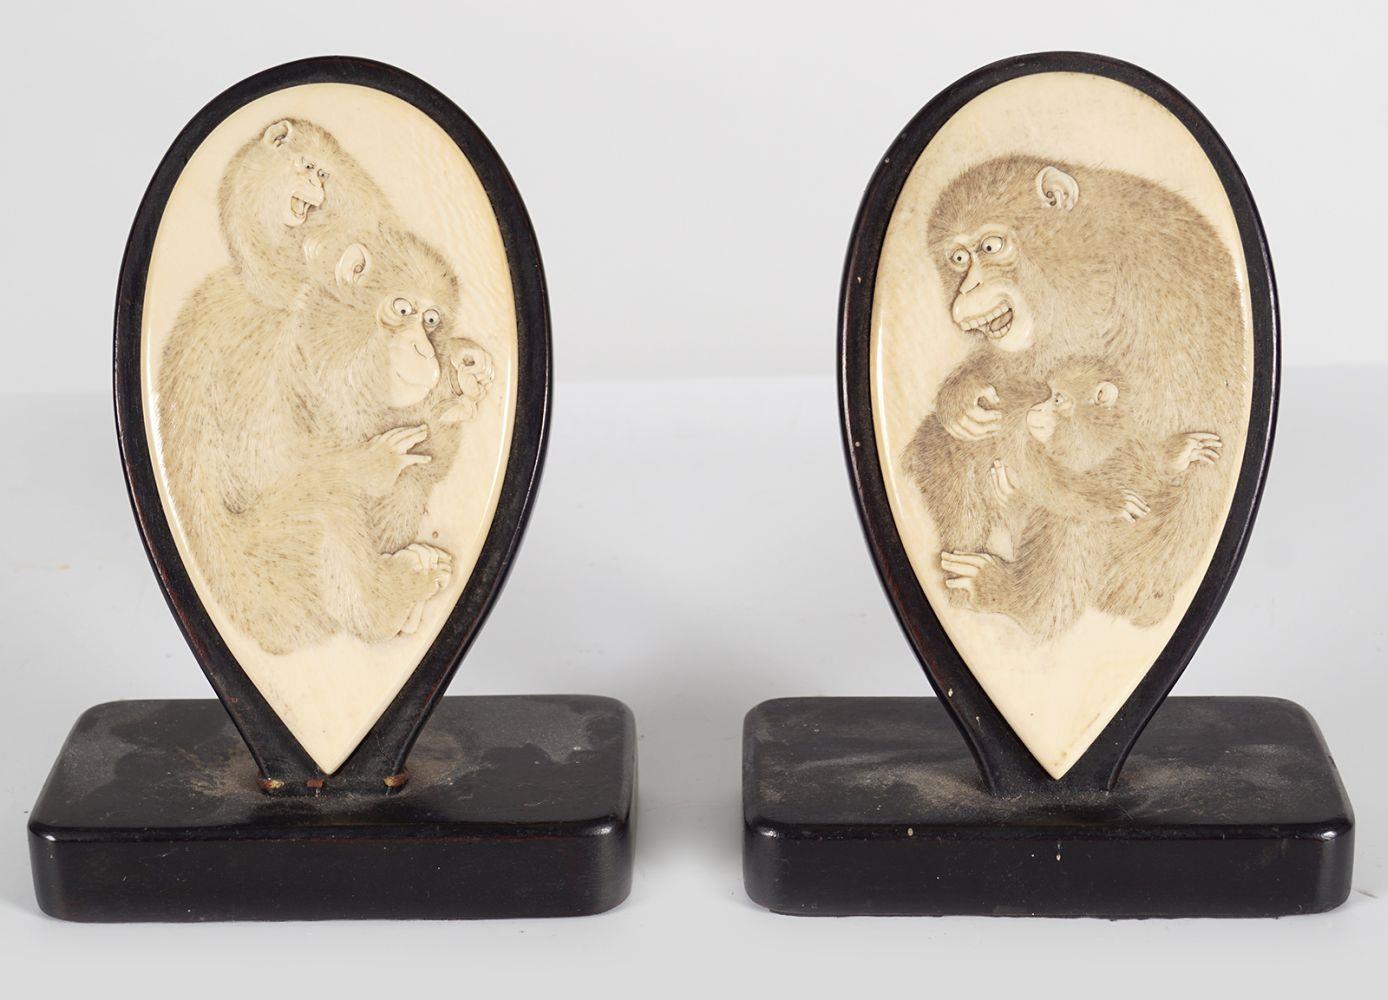 PAIR OF 19TH-CENTURY JAPANESE IVORY PLAQUES